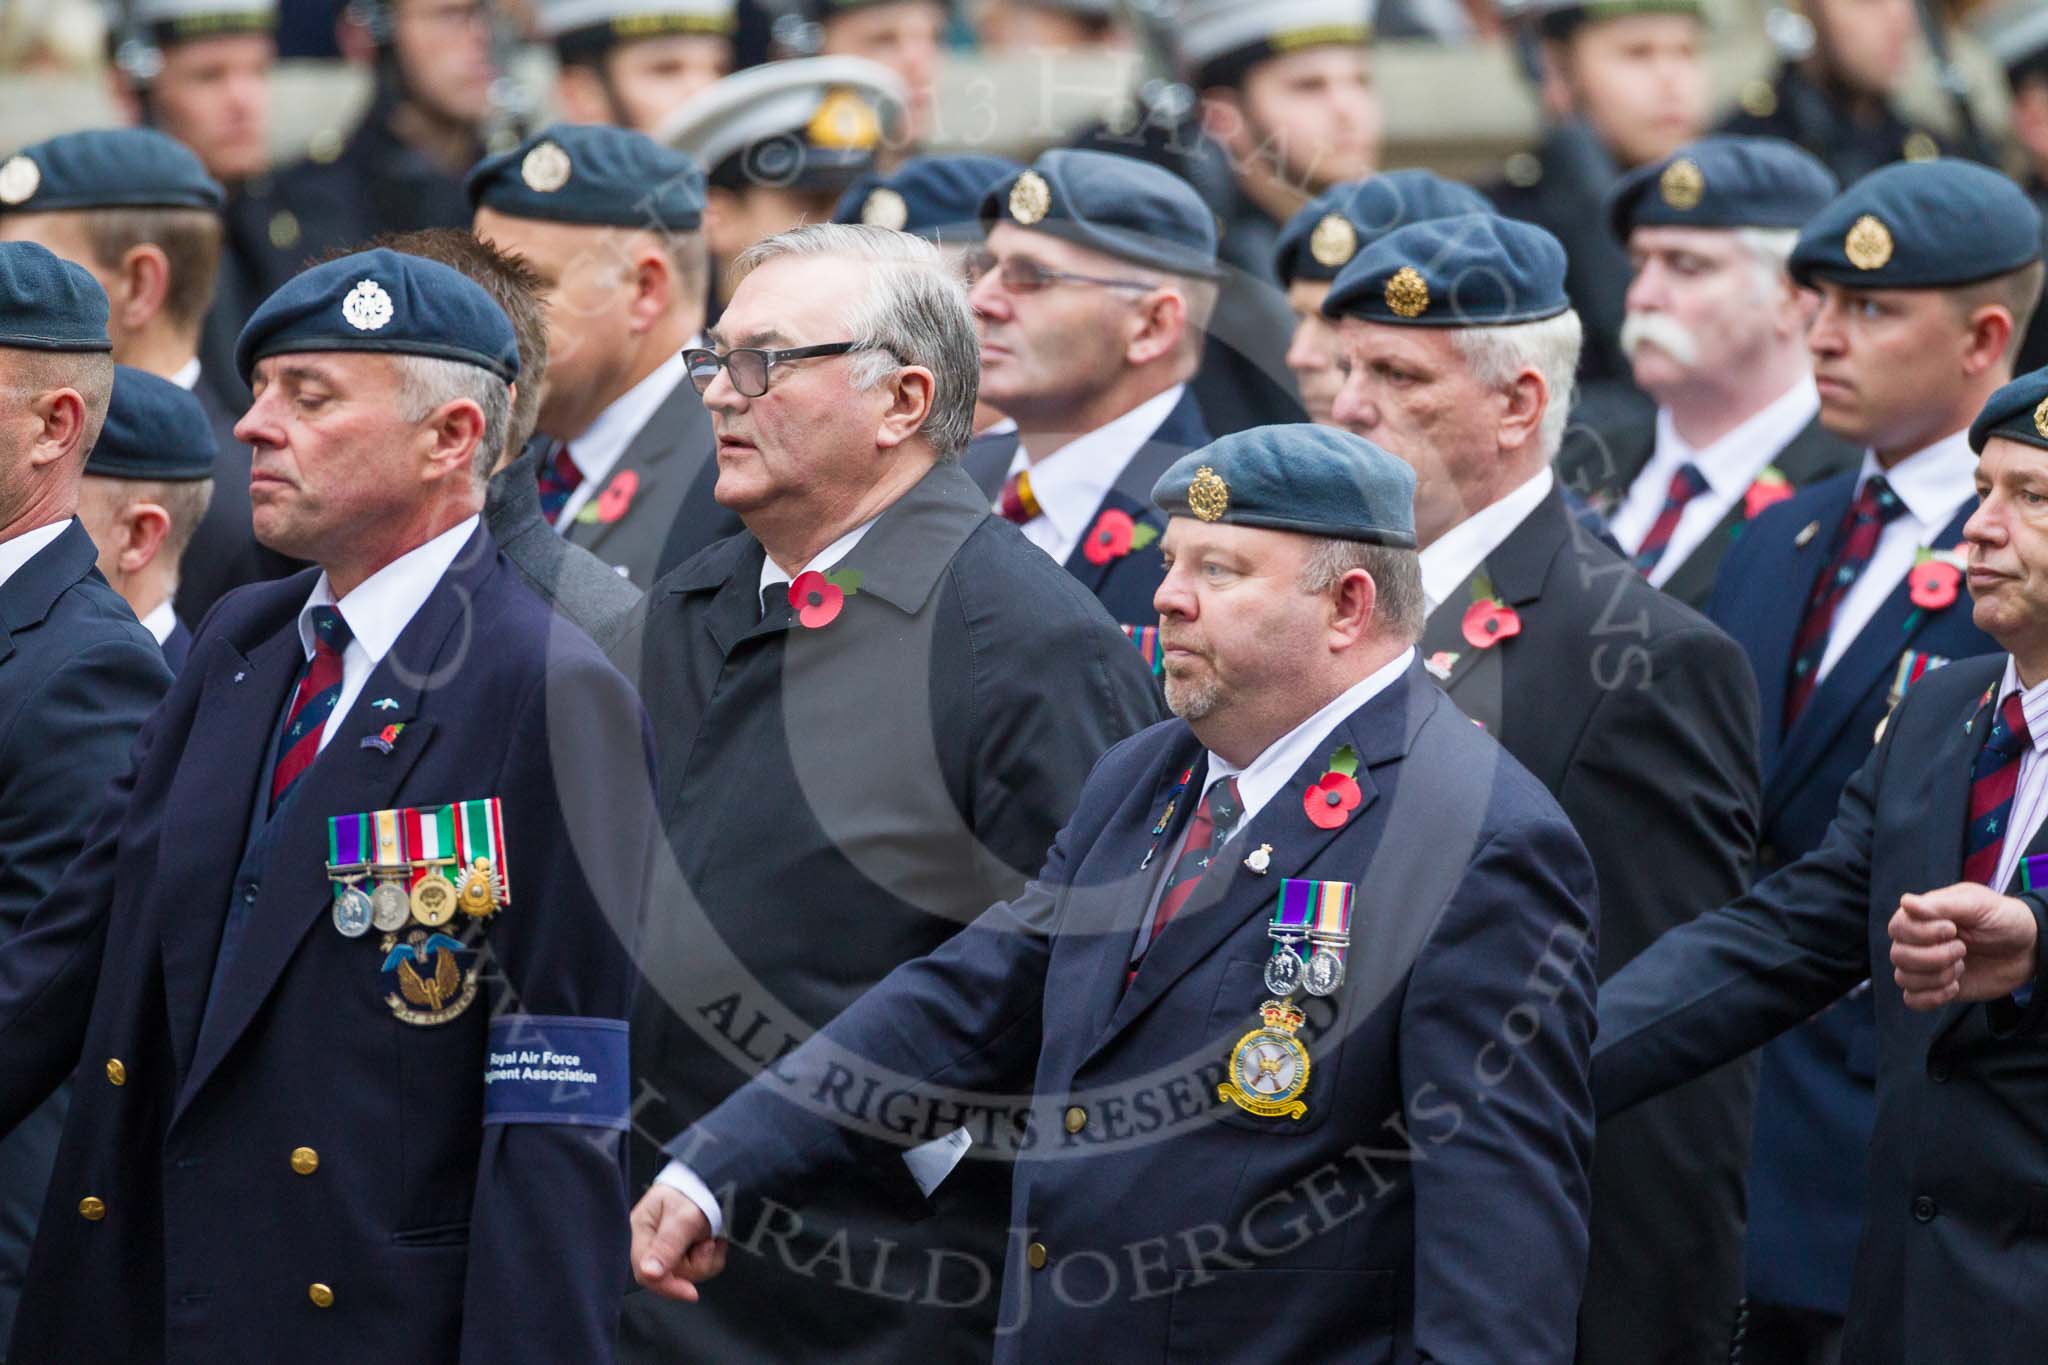 Remembrance Sunday at the Cenotaph 2015: C2, Royal Air Force Regiment Association.
Cenotaph, Whitehall, London SW1,
London,
Greater London,
United Kingdom,
on 08 November 2015 at 11:47, image #417